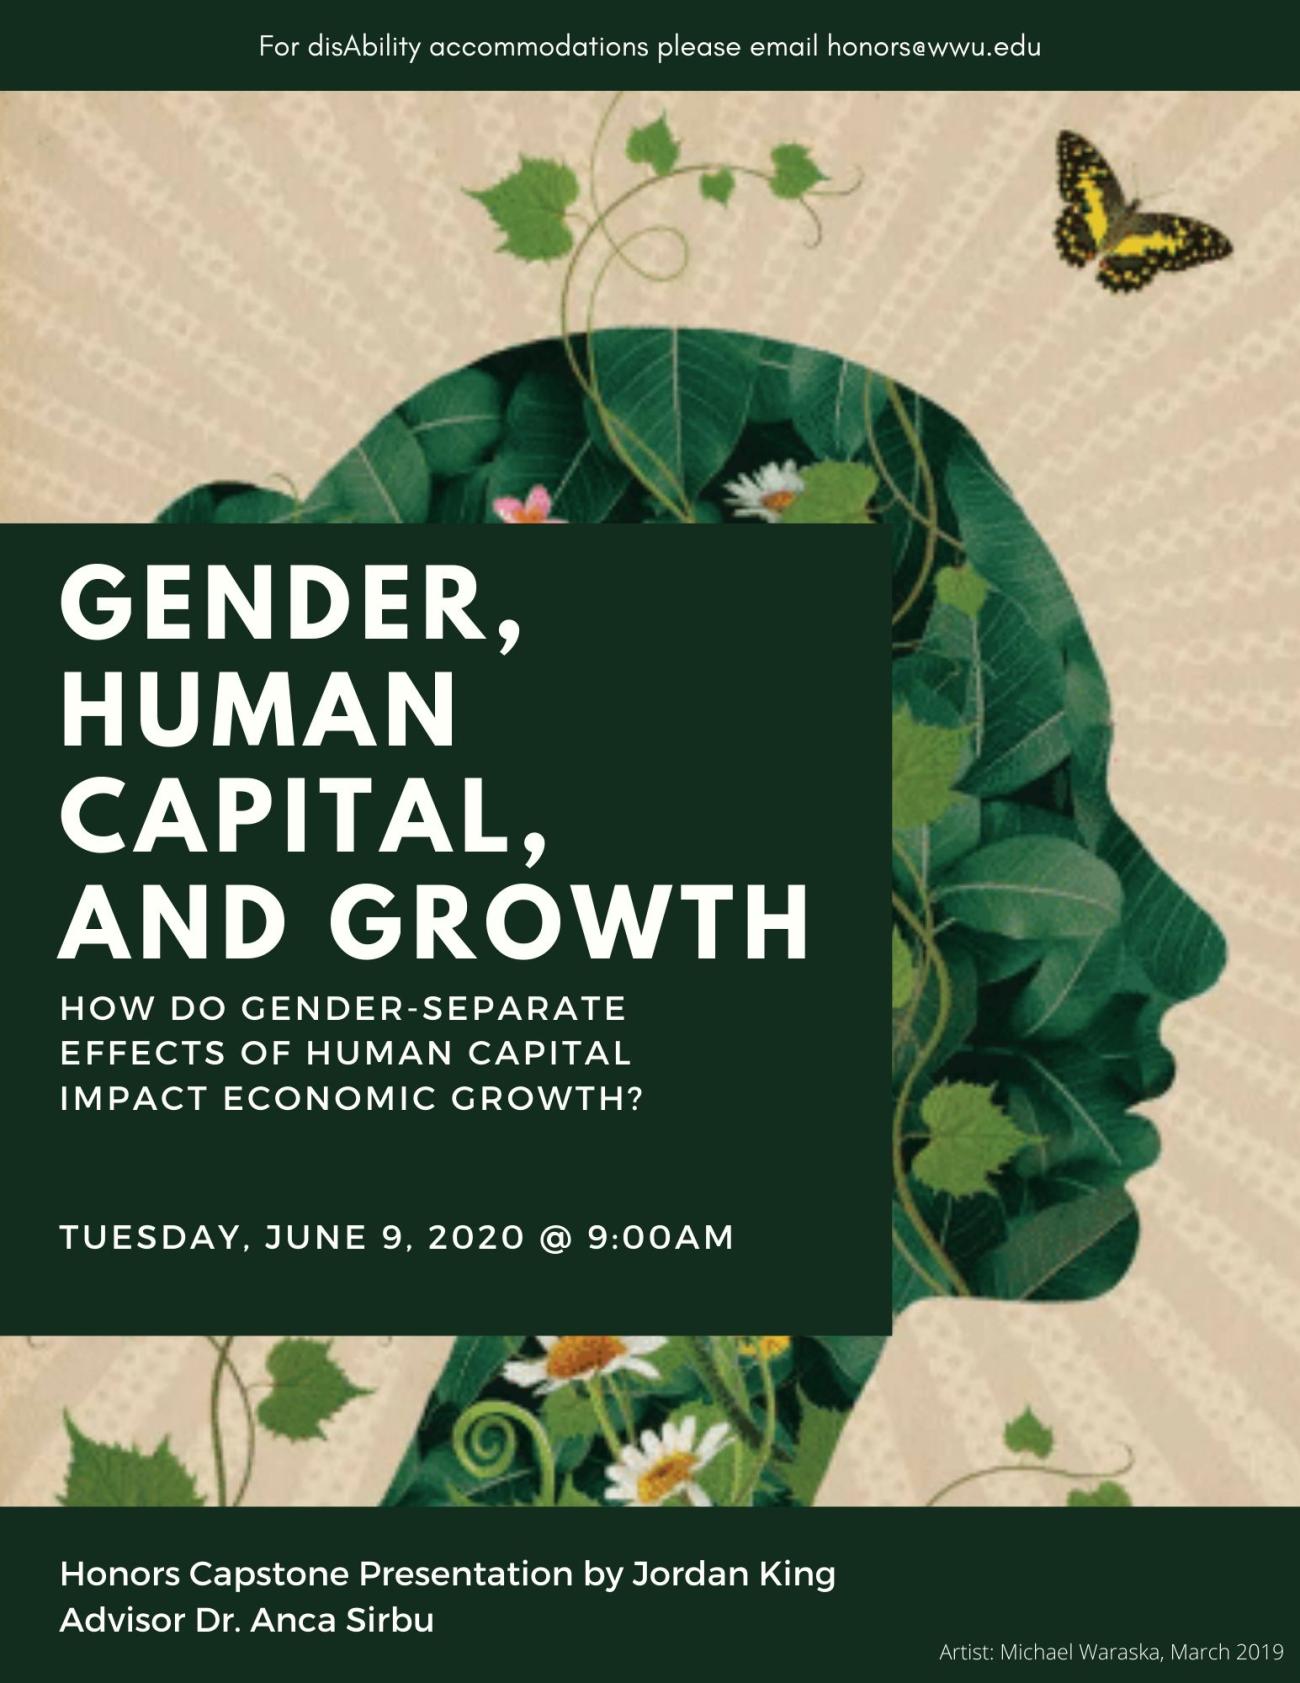 Image: Greenery fills in the outline of a woman’s facial profile on a beige background. Text: "For disability accommodations please email honors@wwu.edu. Gender and Human Capital: How do gender-separate effects of human capital impact economic growth? Tuesday, June 9, 2020 @ 9:00 AM. Honors Capstone Presentation by Jordan King, Advisor Dr. Anca Sirbu. Artist: Michael Waraska, March 2019."